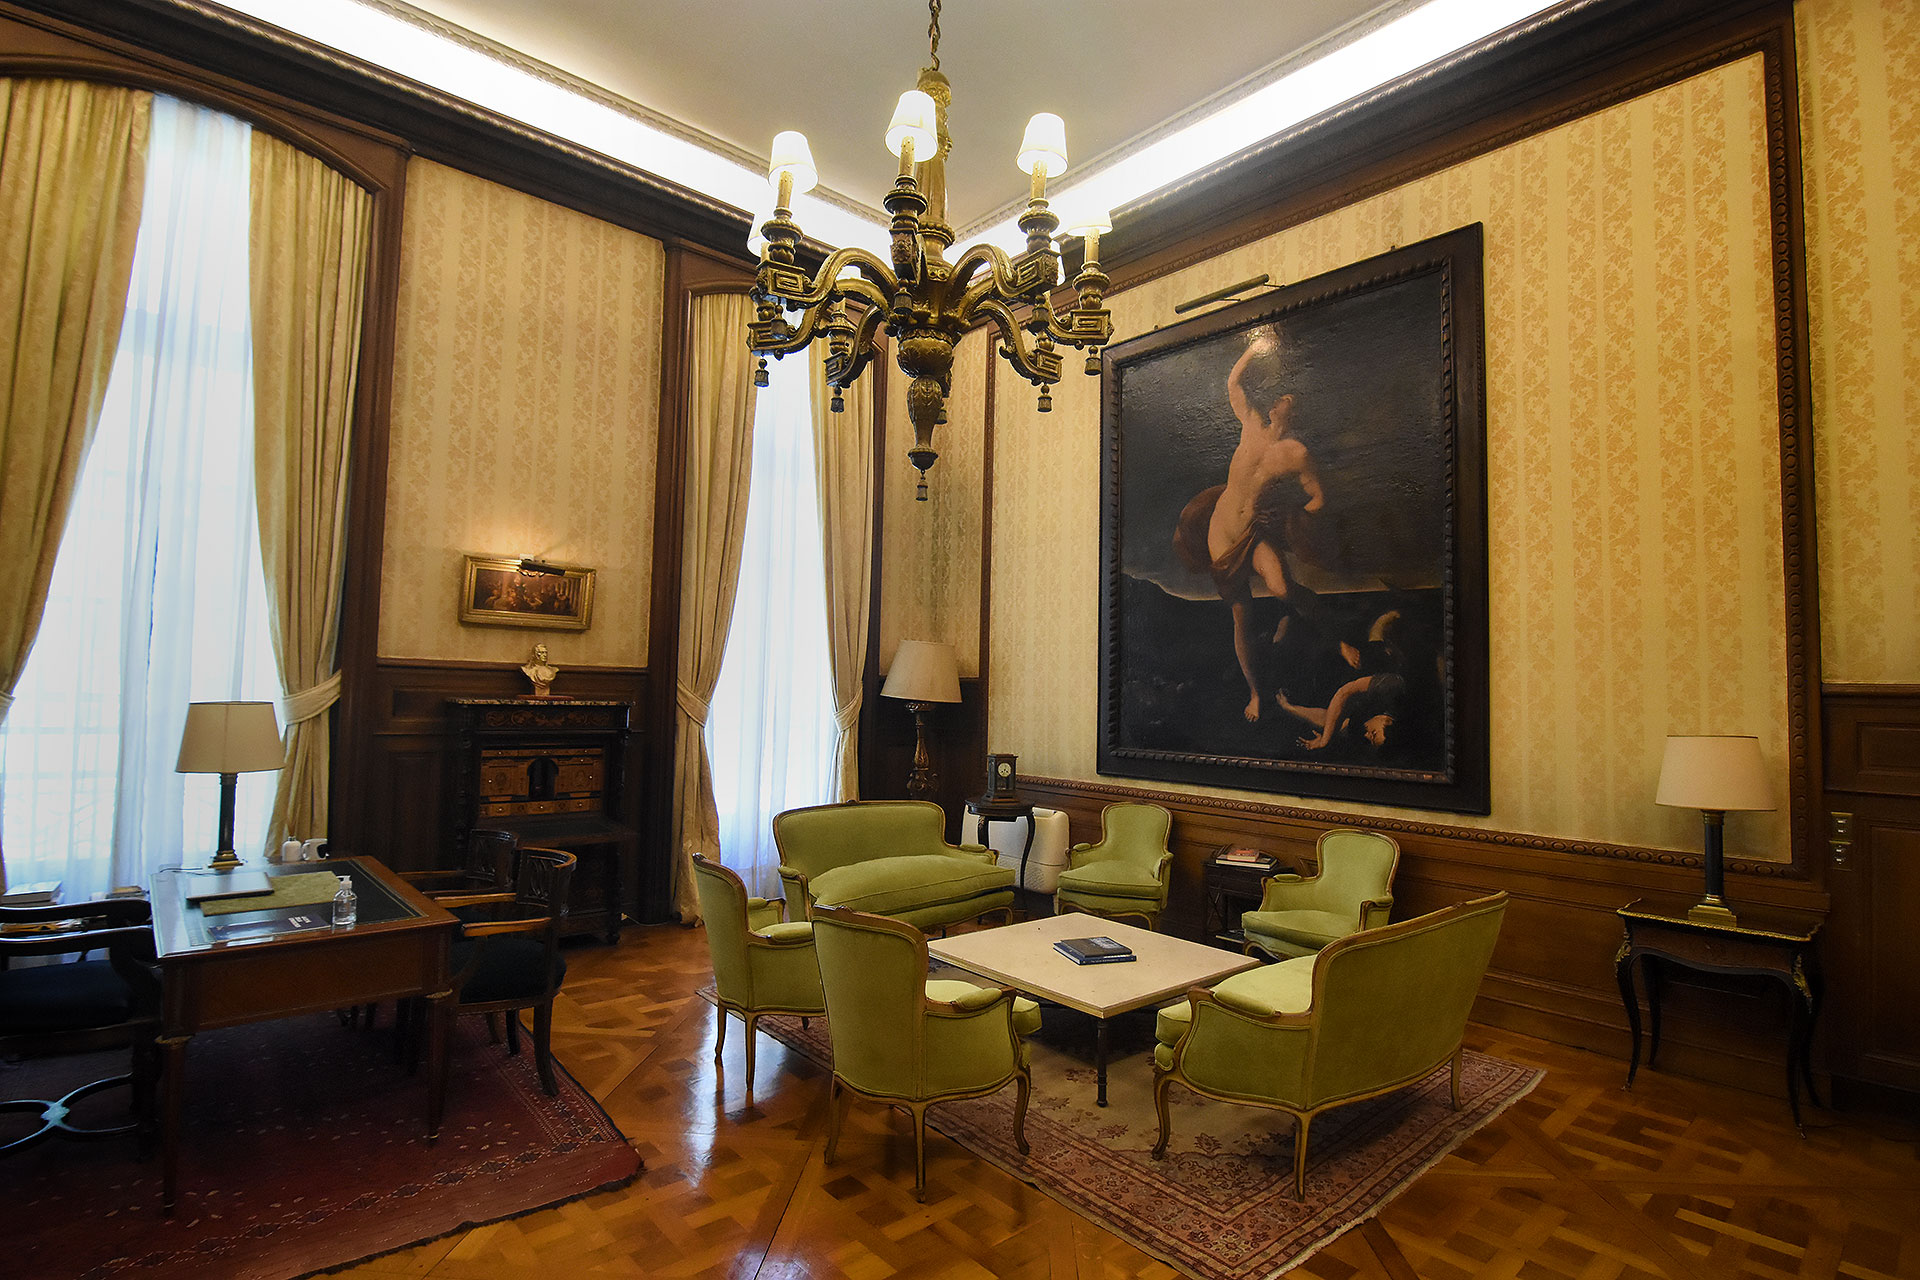 In the small reception room of the ambassador, a large 17th century oil painting with the figure of Samson (Nicolas Stulberg) prevails.